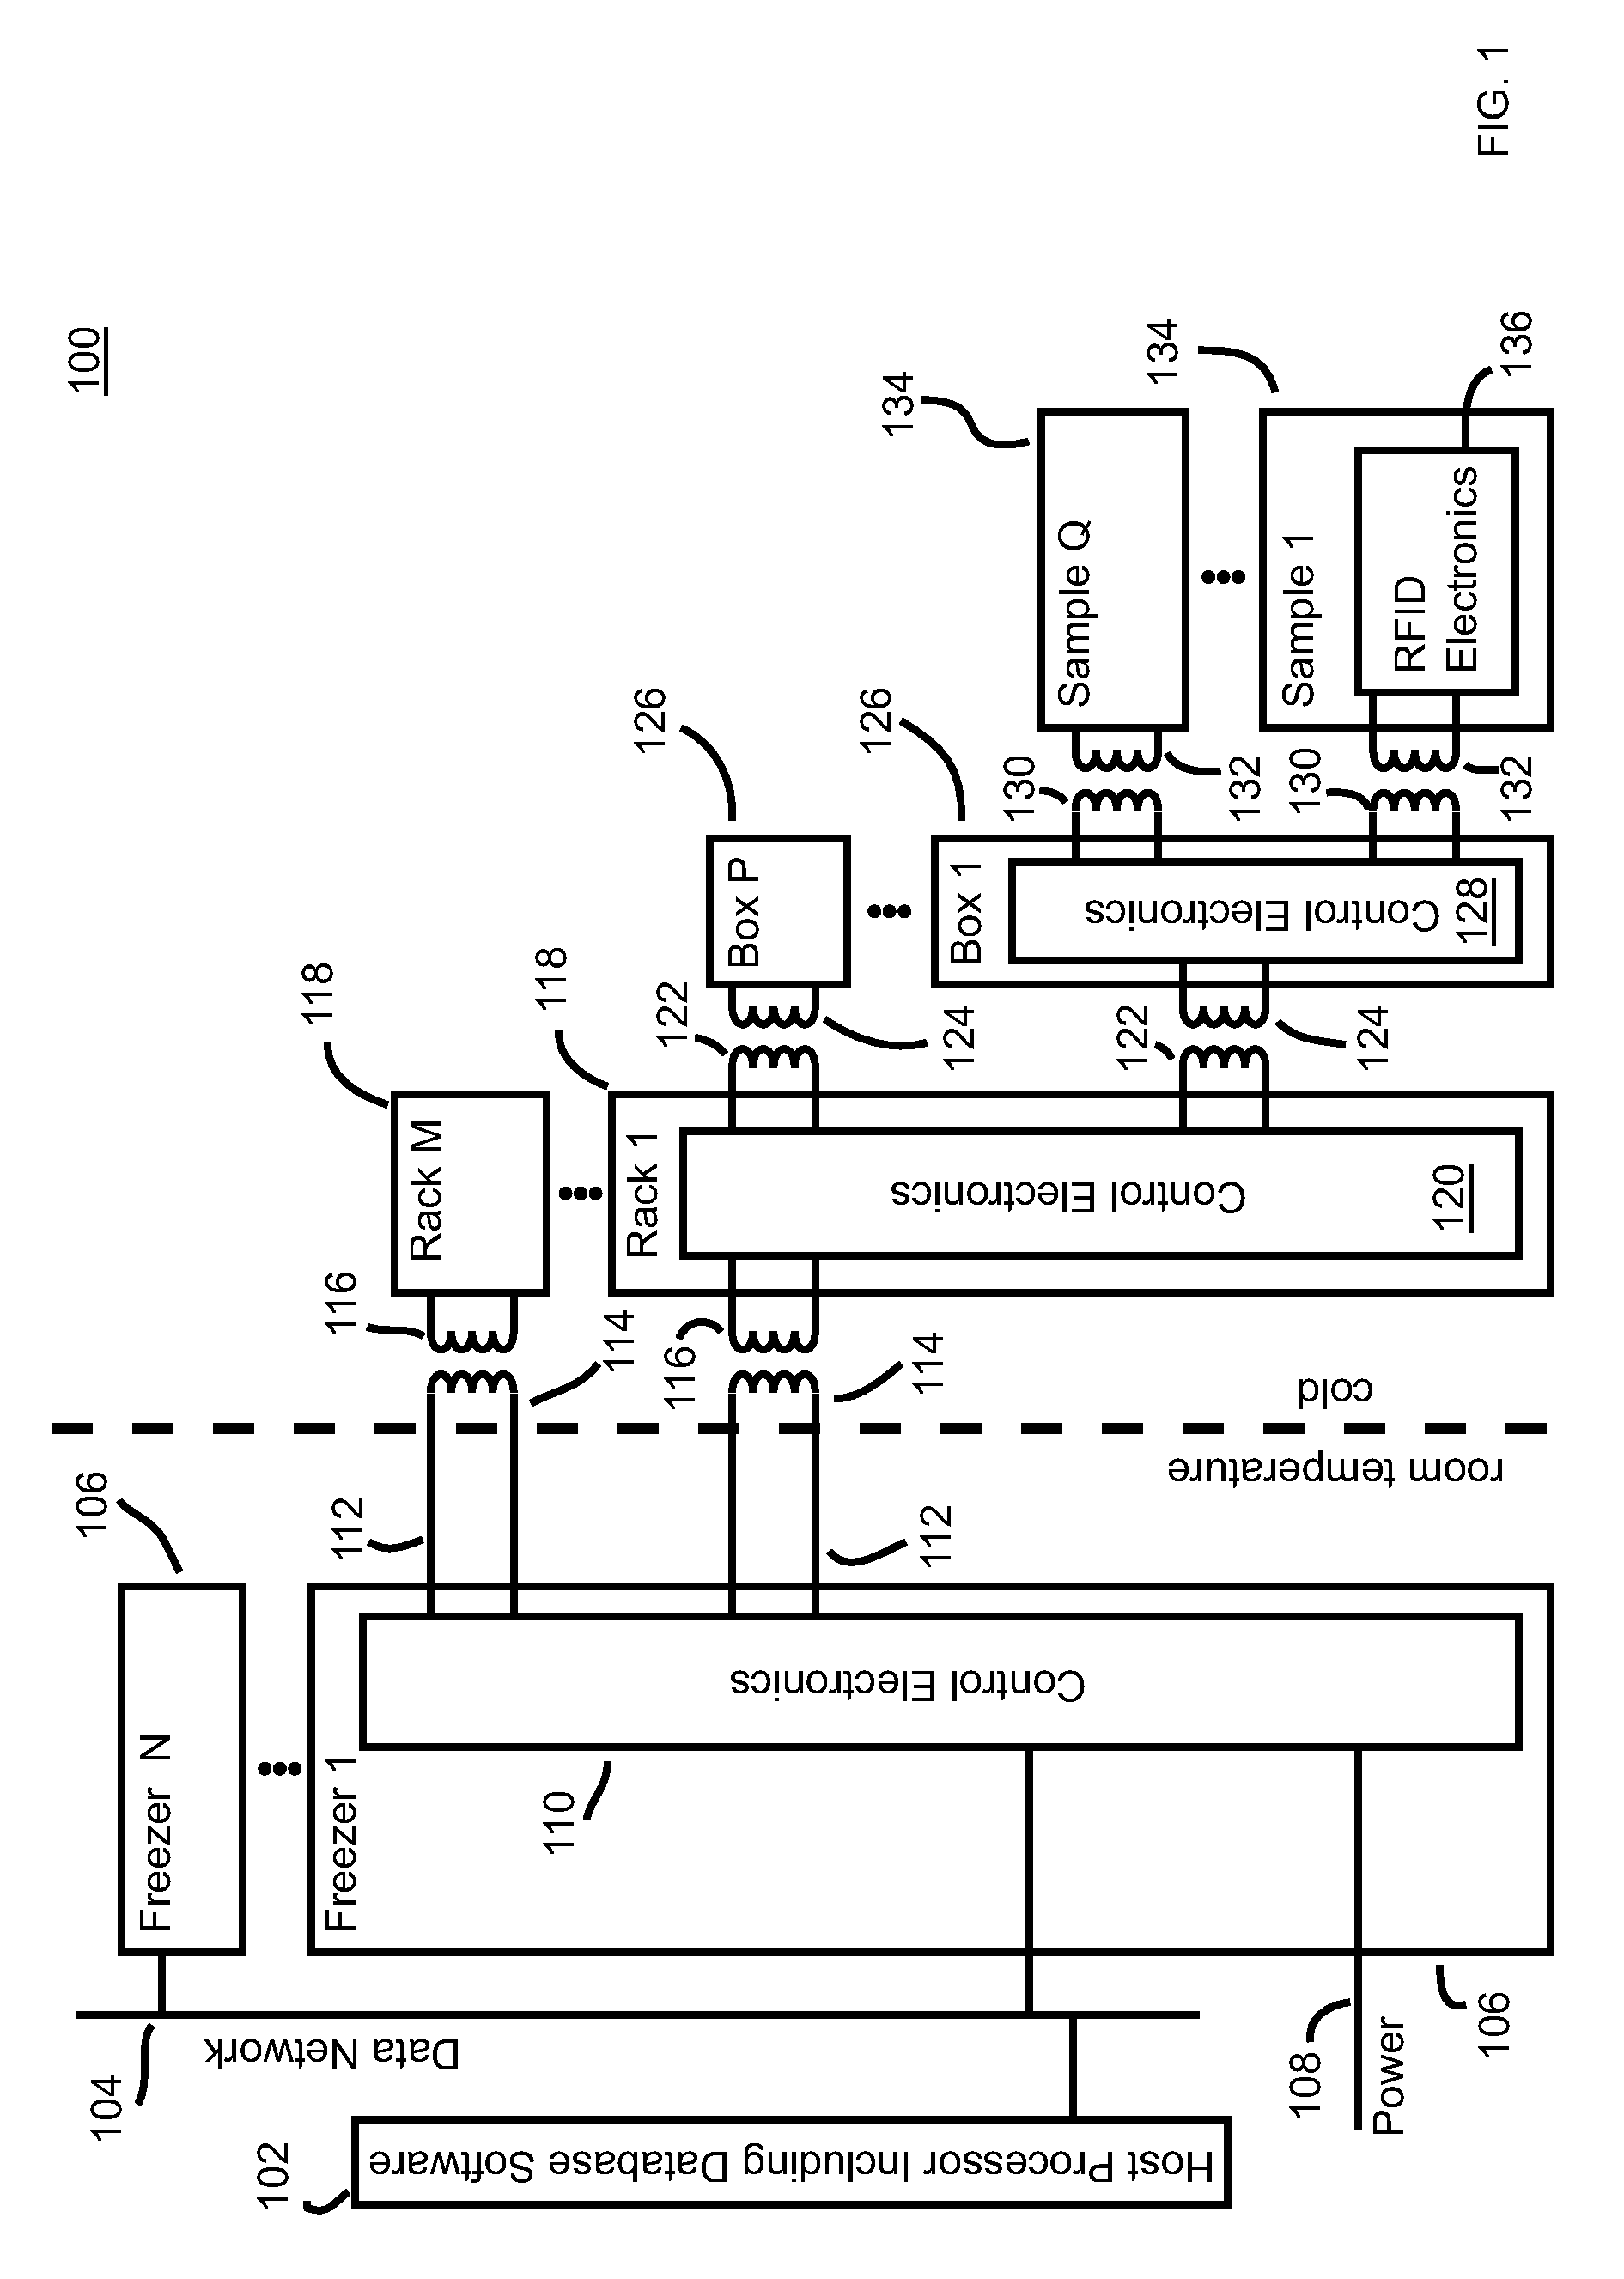 Two-dimensional antenna configuration